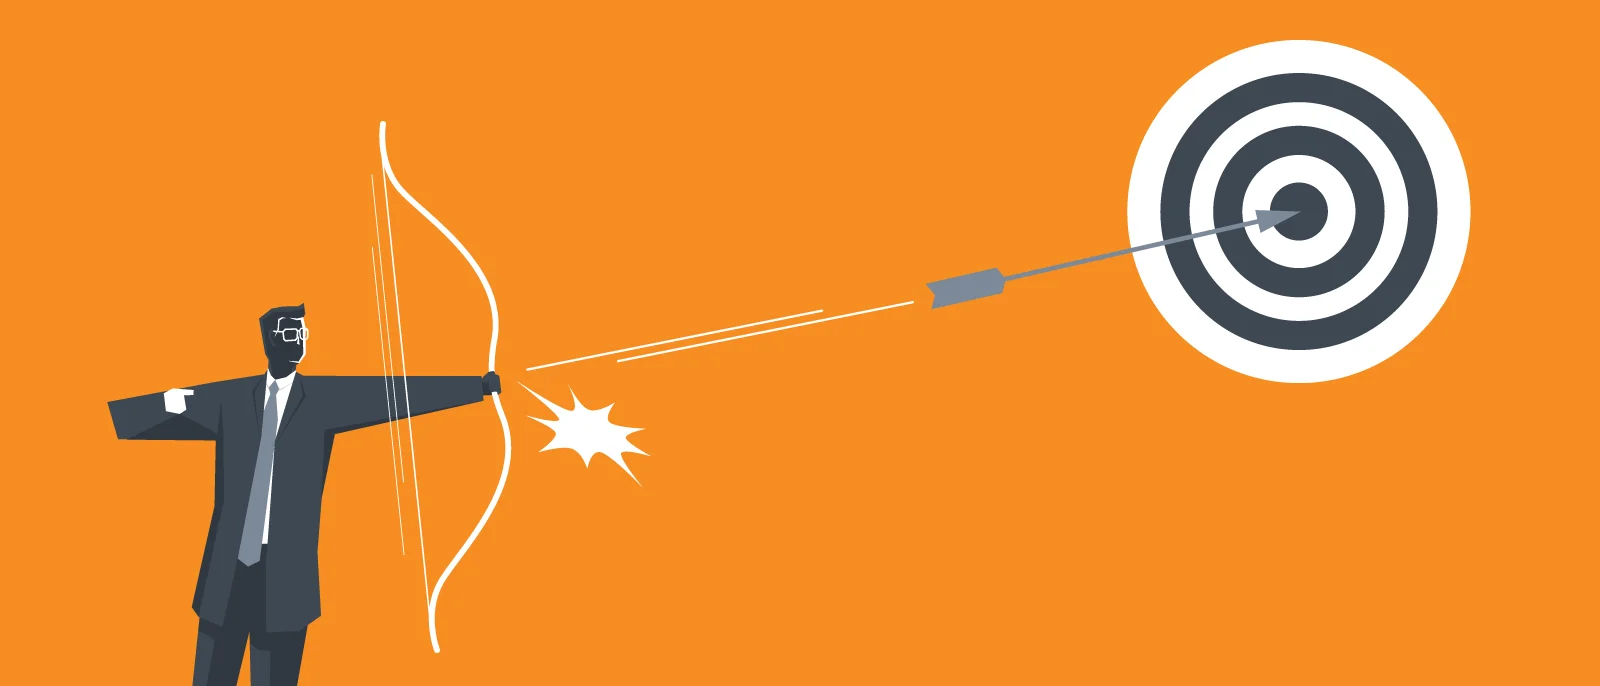 Illustration of a man in a suit drawing a bow and arrow, aiming at a target. The man is on the left, with a starburst indicating the arrow’s release. The arrow is in mid-flight towards a bullseye on the right, against an orange background, symbolizing precision and goal achievement in the context of the Lucidchart Affiliate Program.